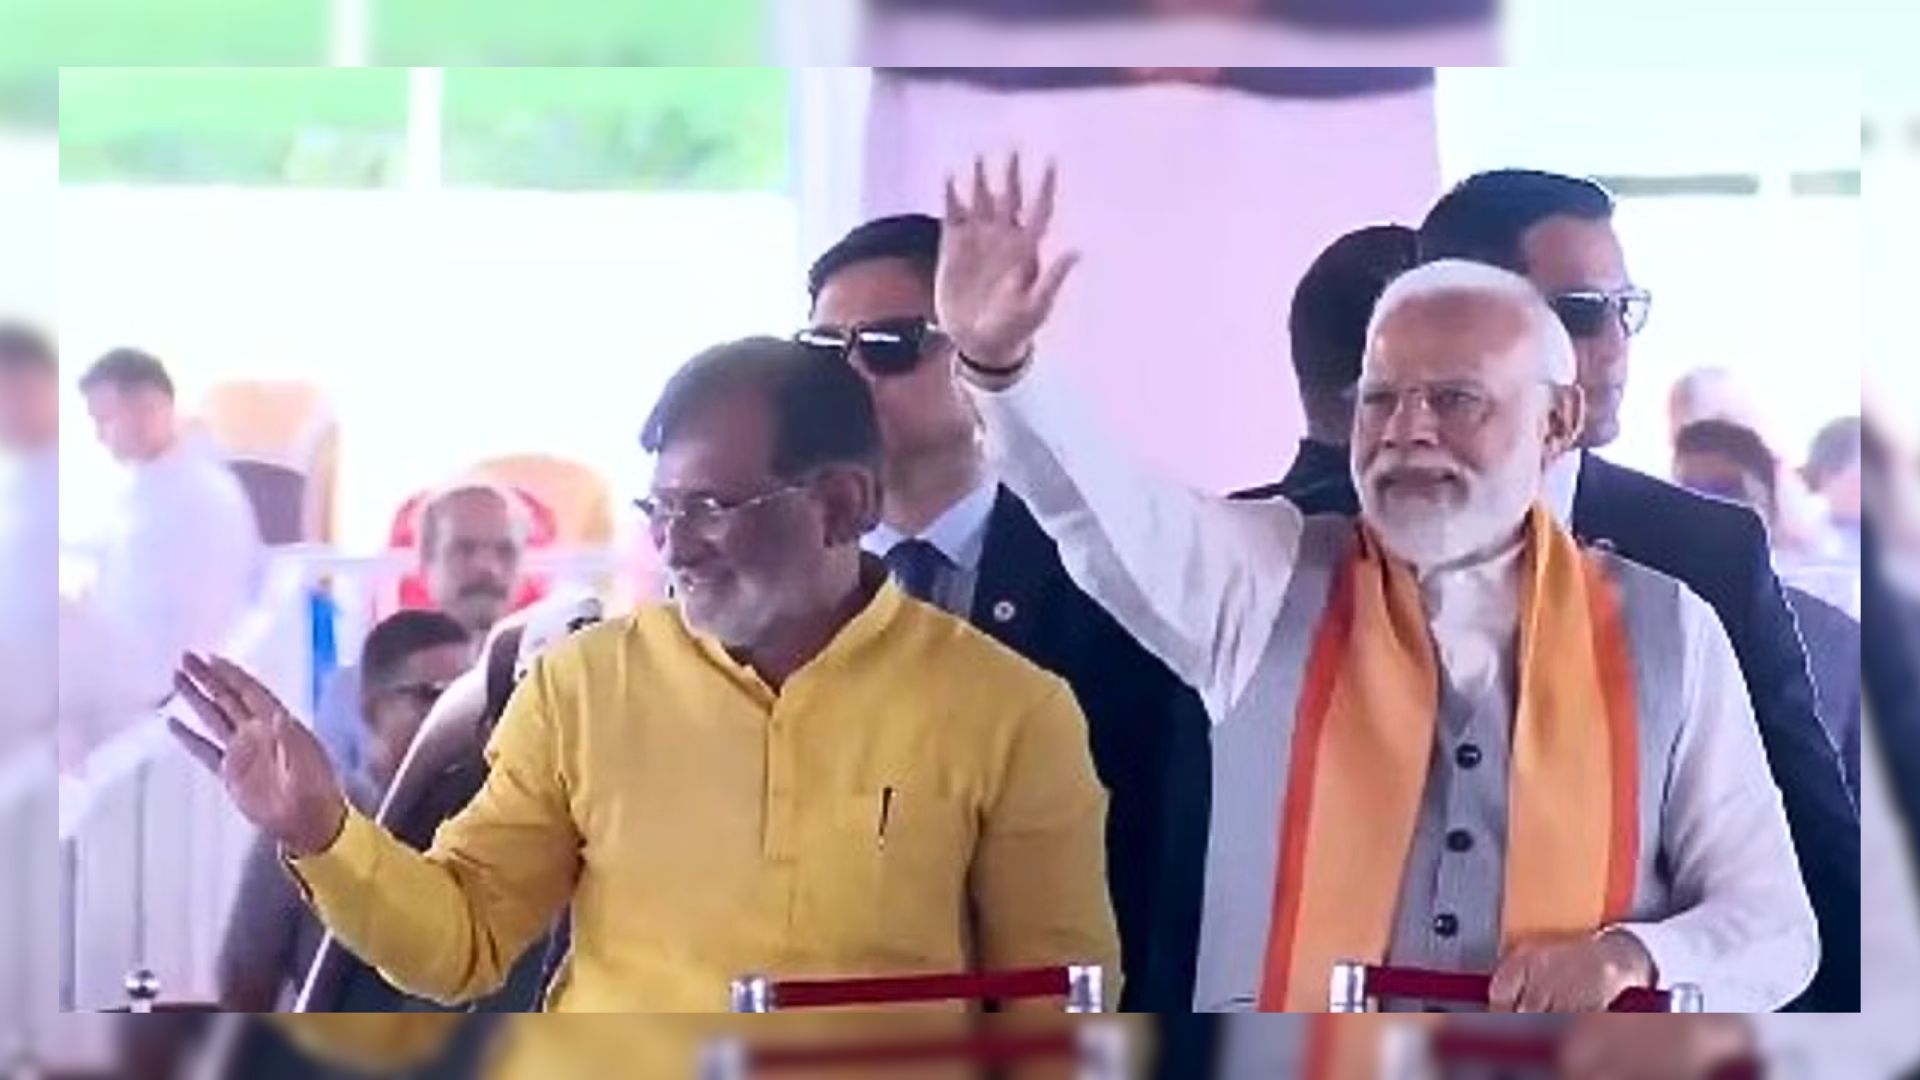 PM Modi has arrived in Kavaratti to commence the inauguration